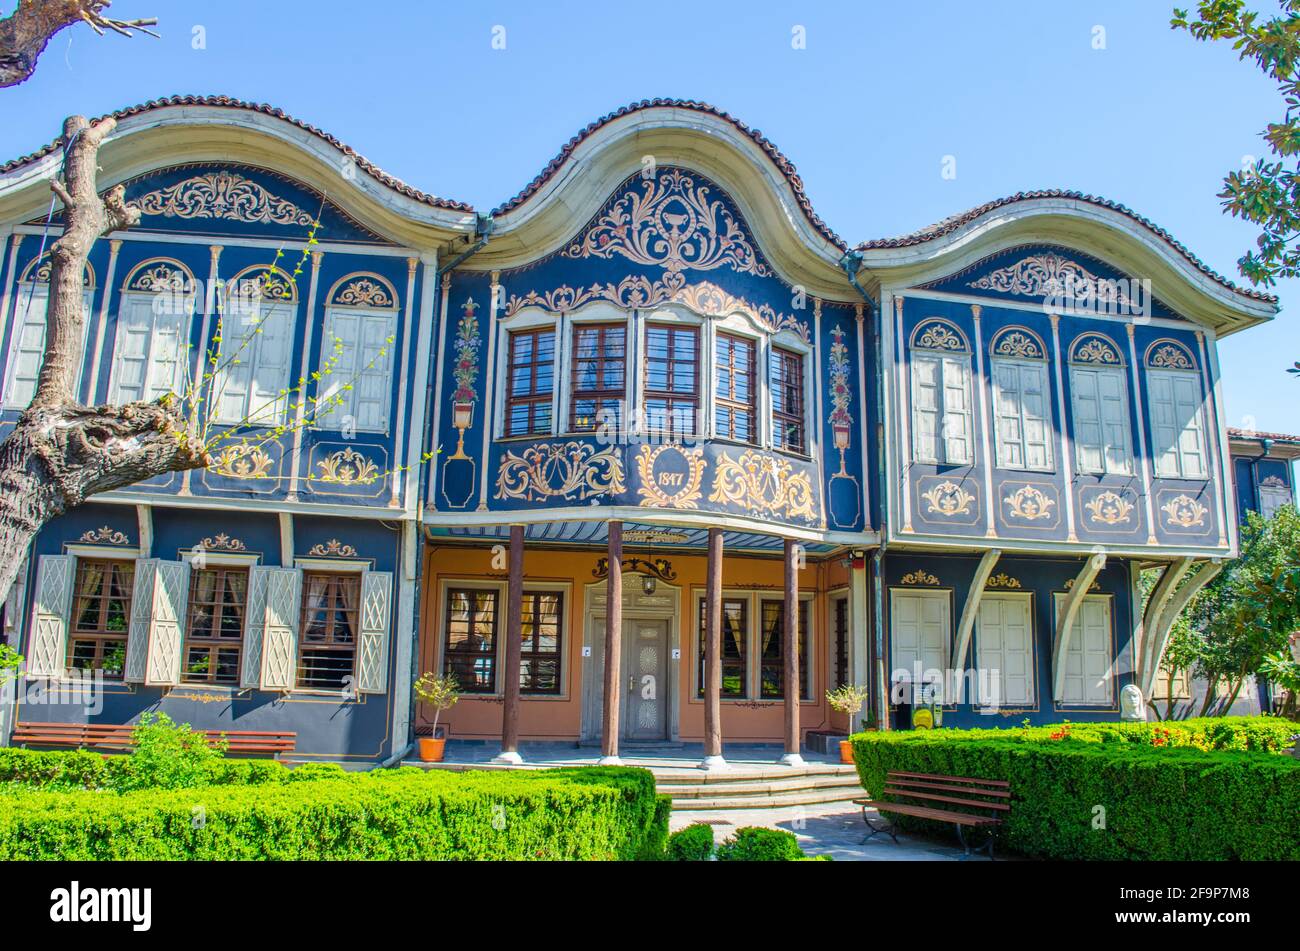 Ethnographic Museum in the town of Plovdiv in Bulgaria Stock Photo